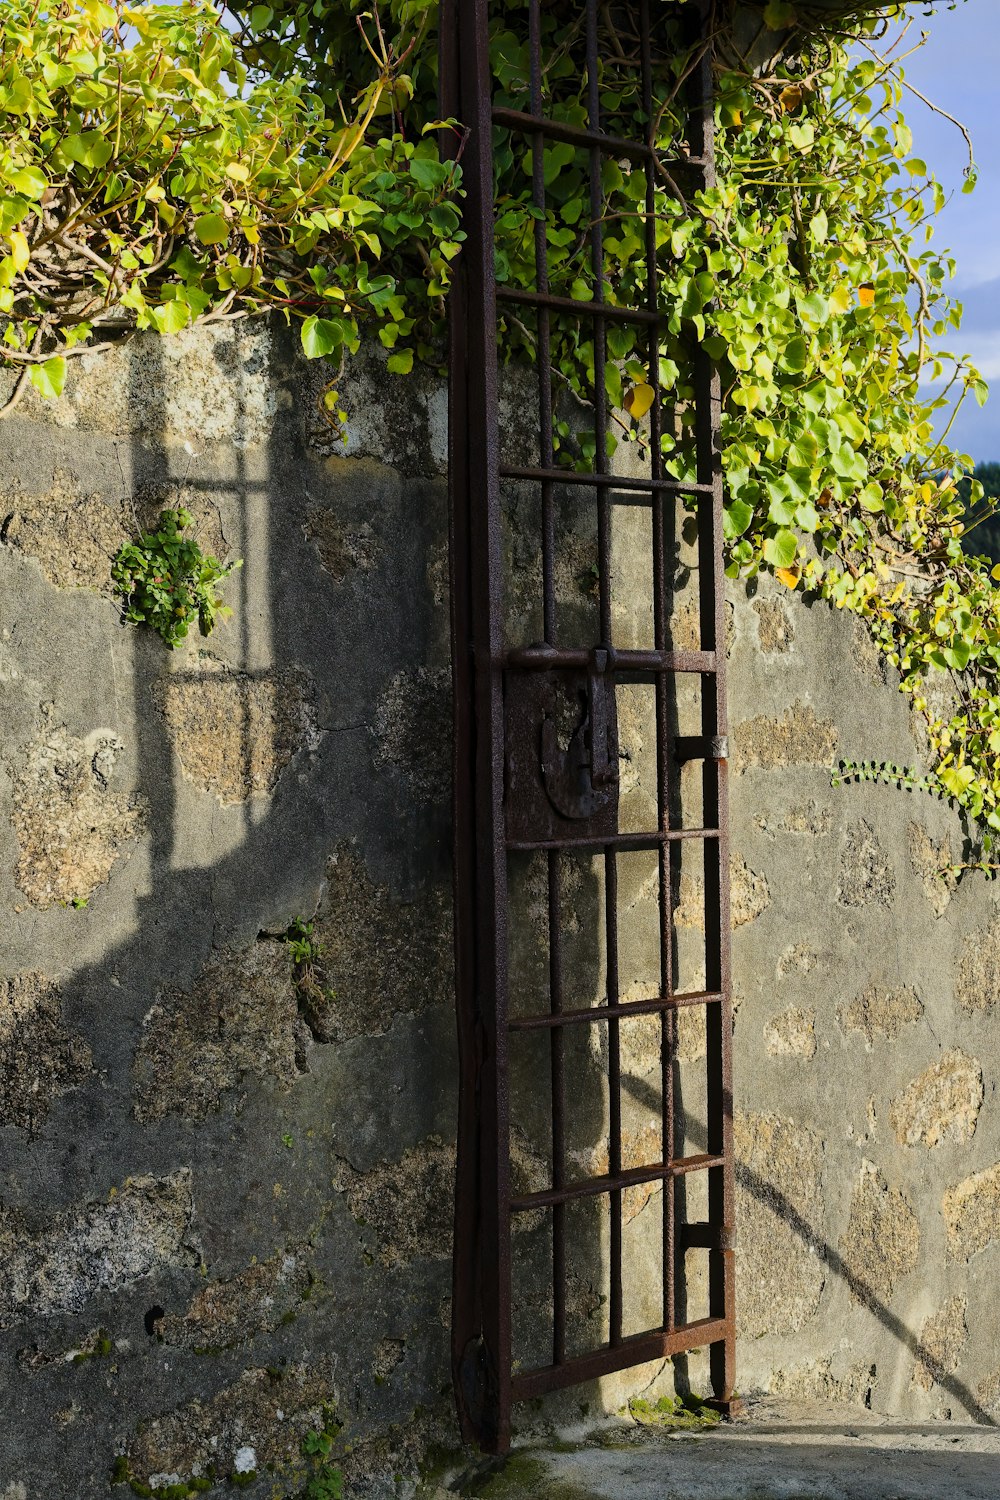 an old iron window with vines growing over it